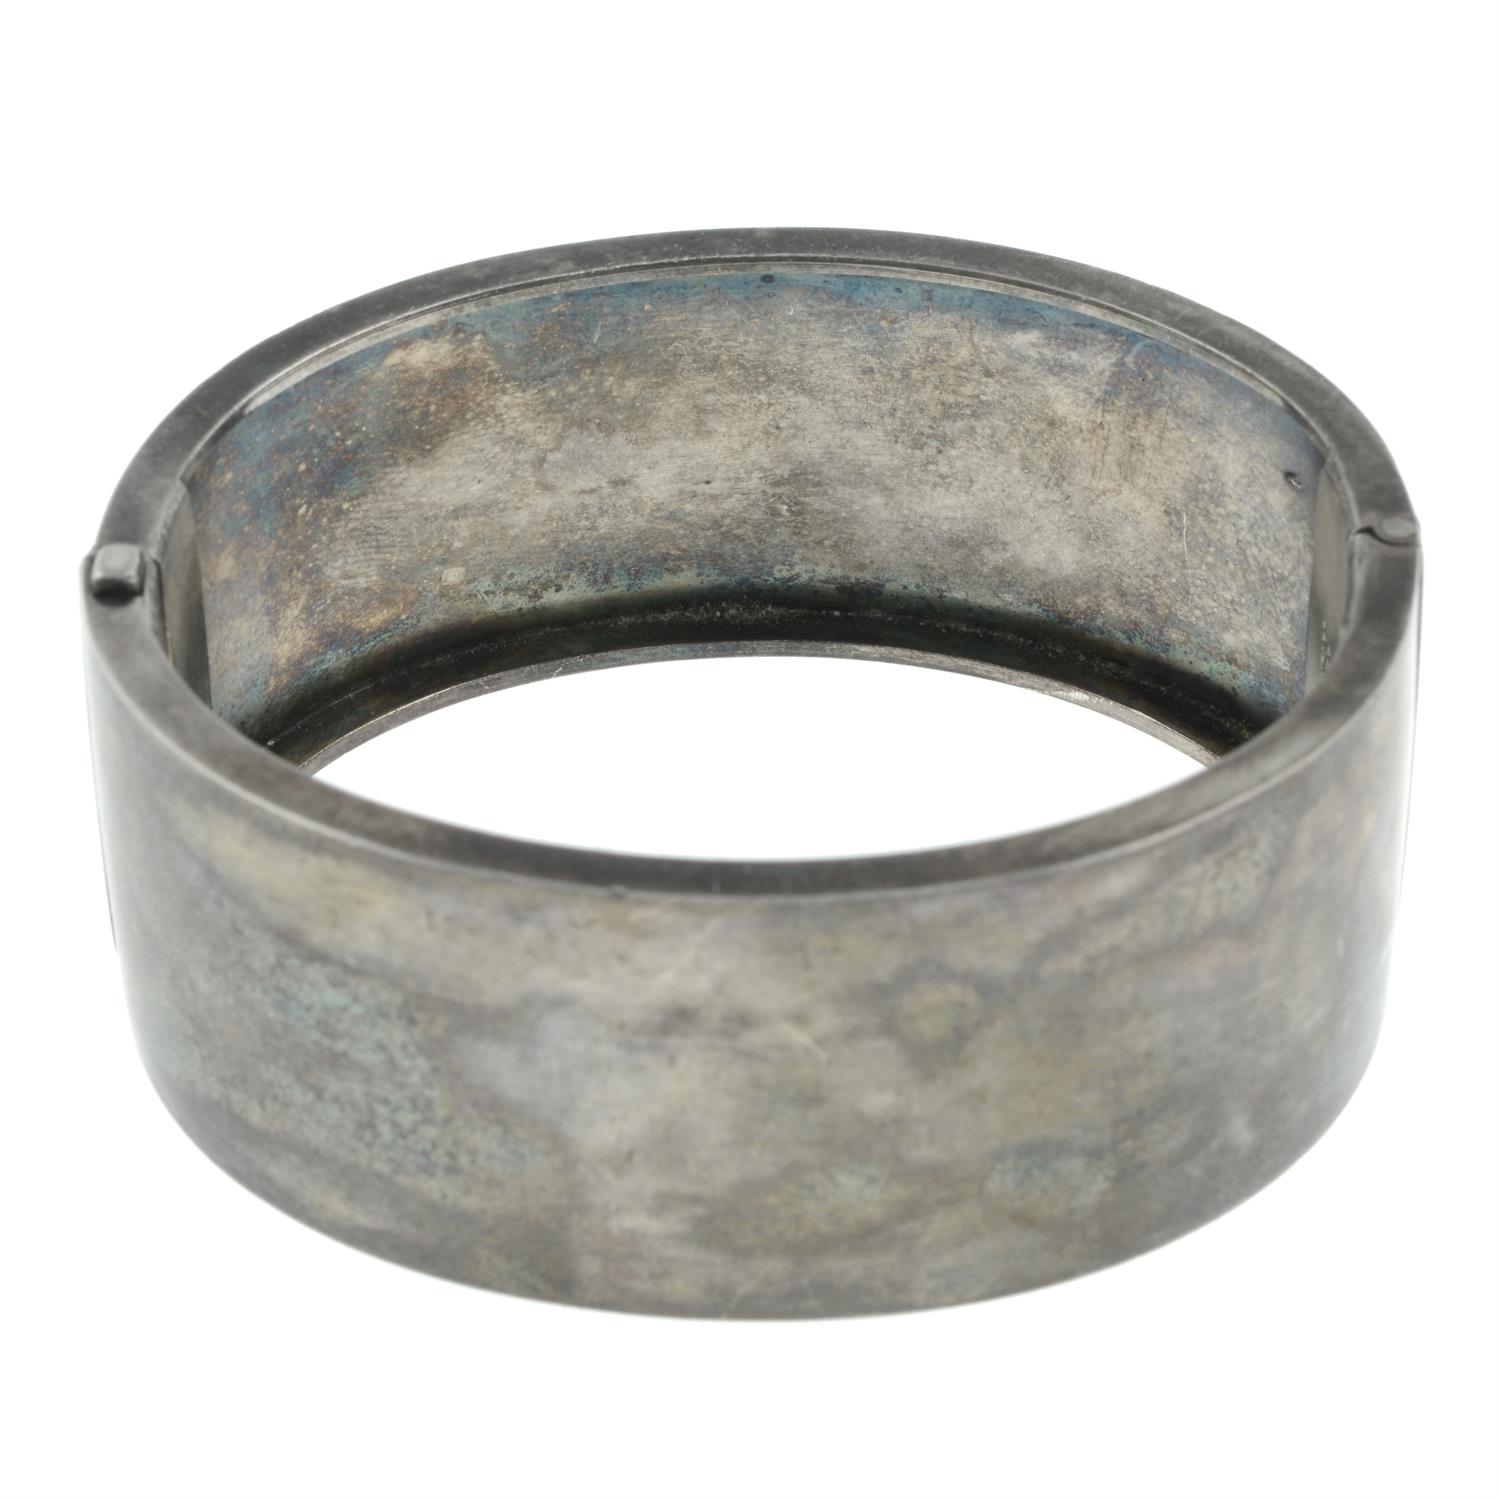 Victorian silver bangle - Image 2 of 2